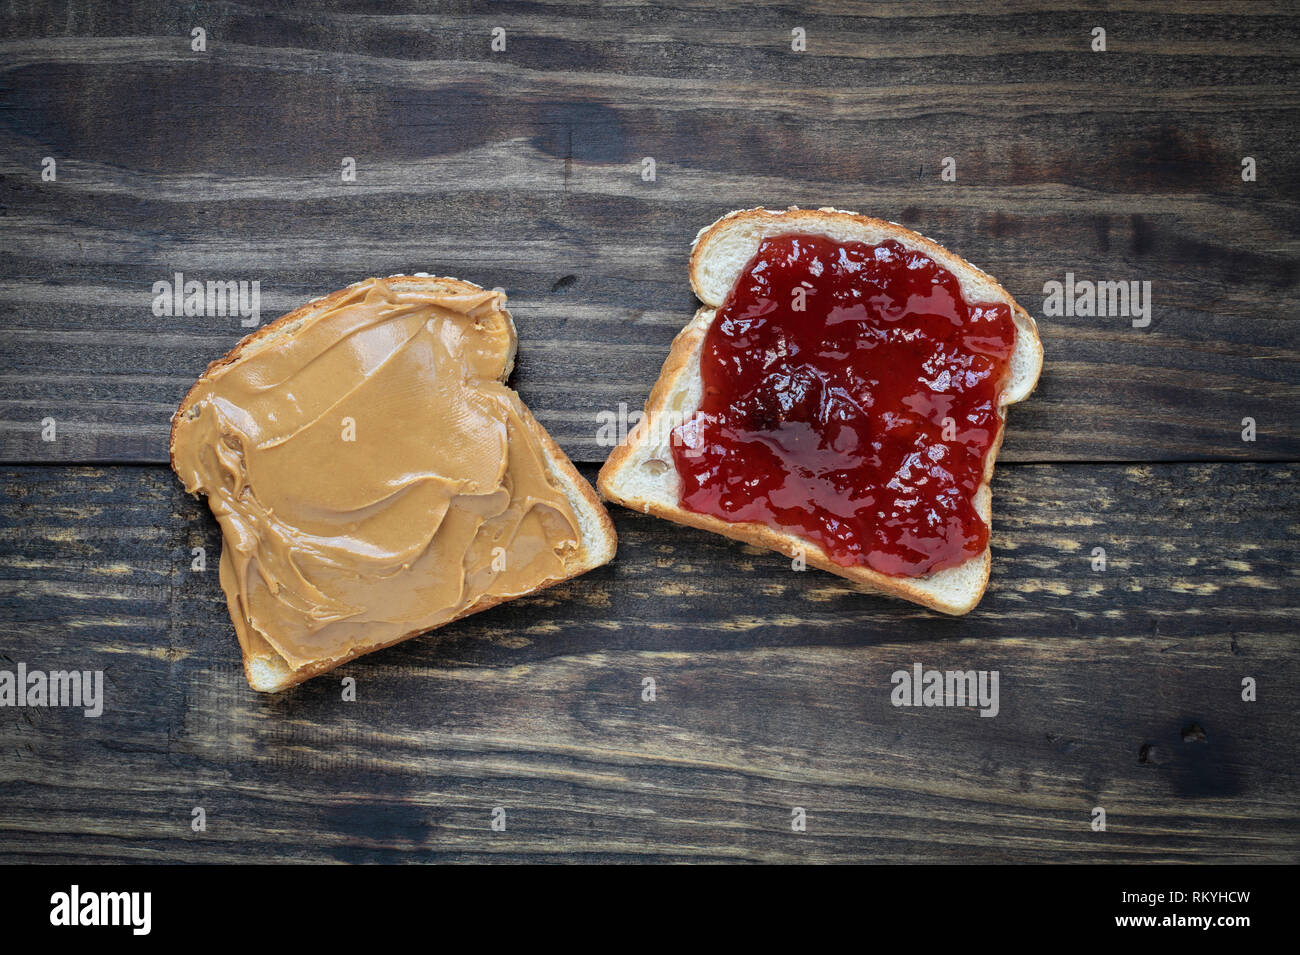 Top view of open face homemade peanut butter and strawberry Jelly sandwich on oat bread, over a rustic wooden background. Stock Photo